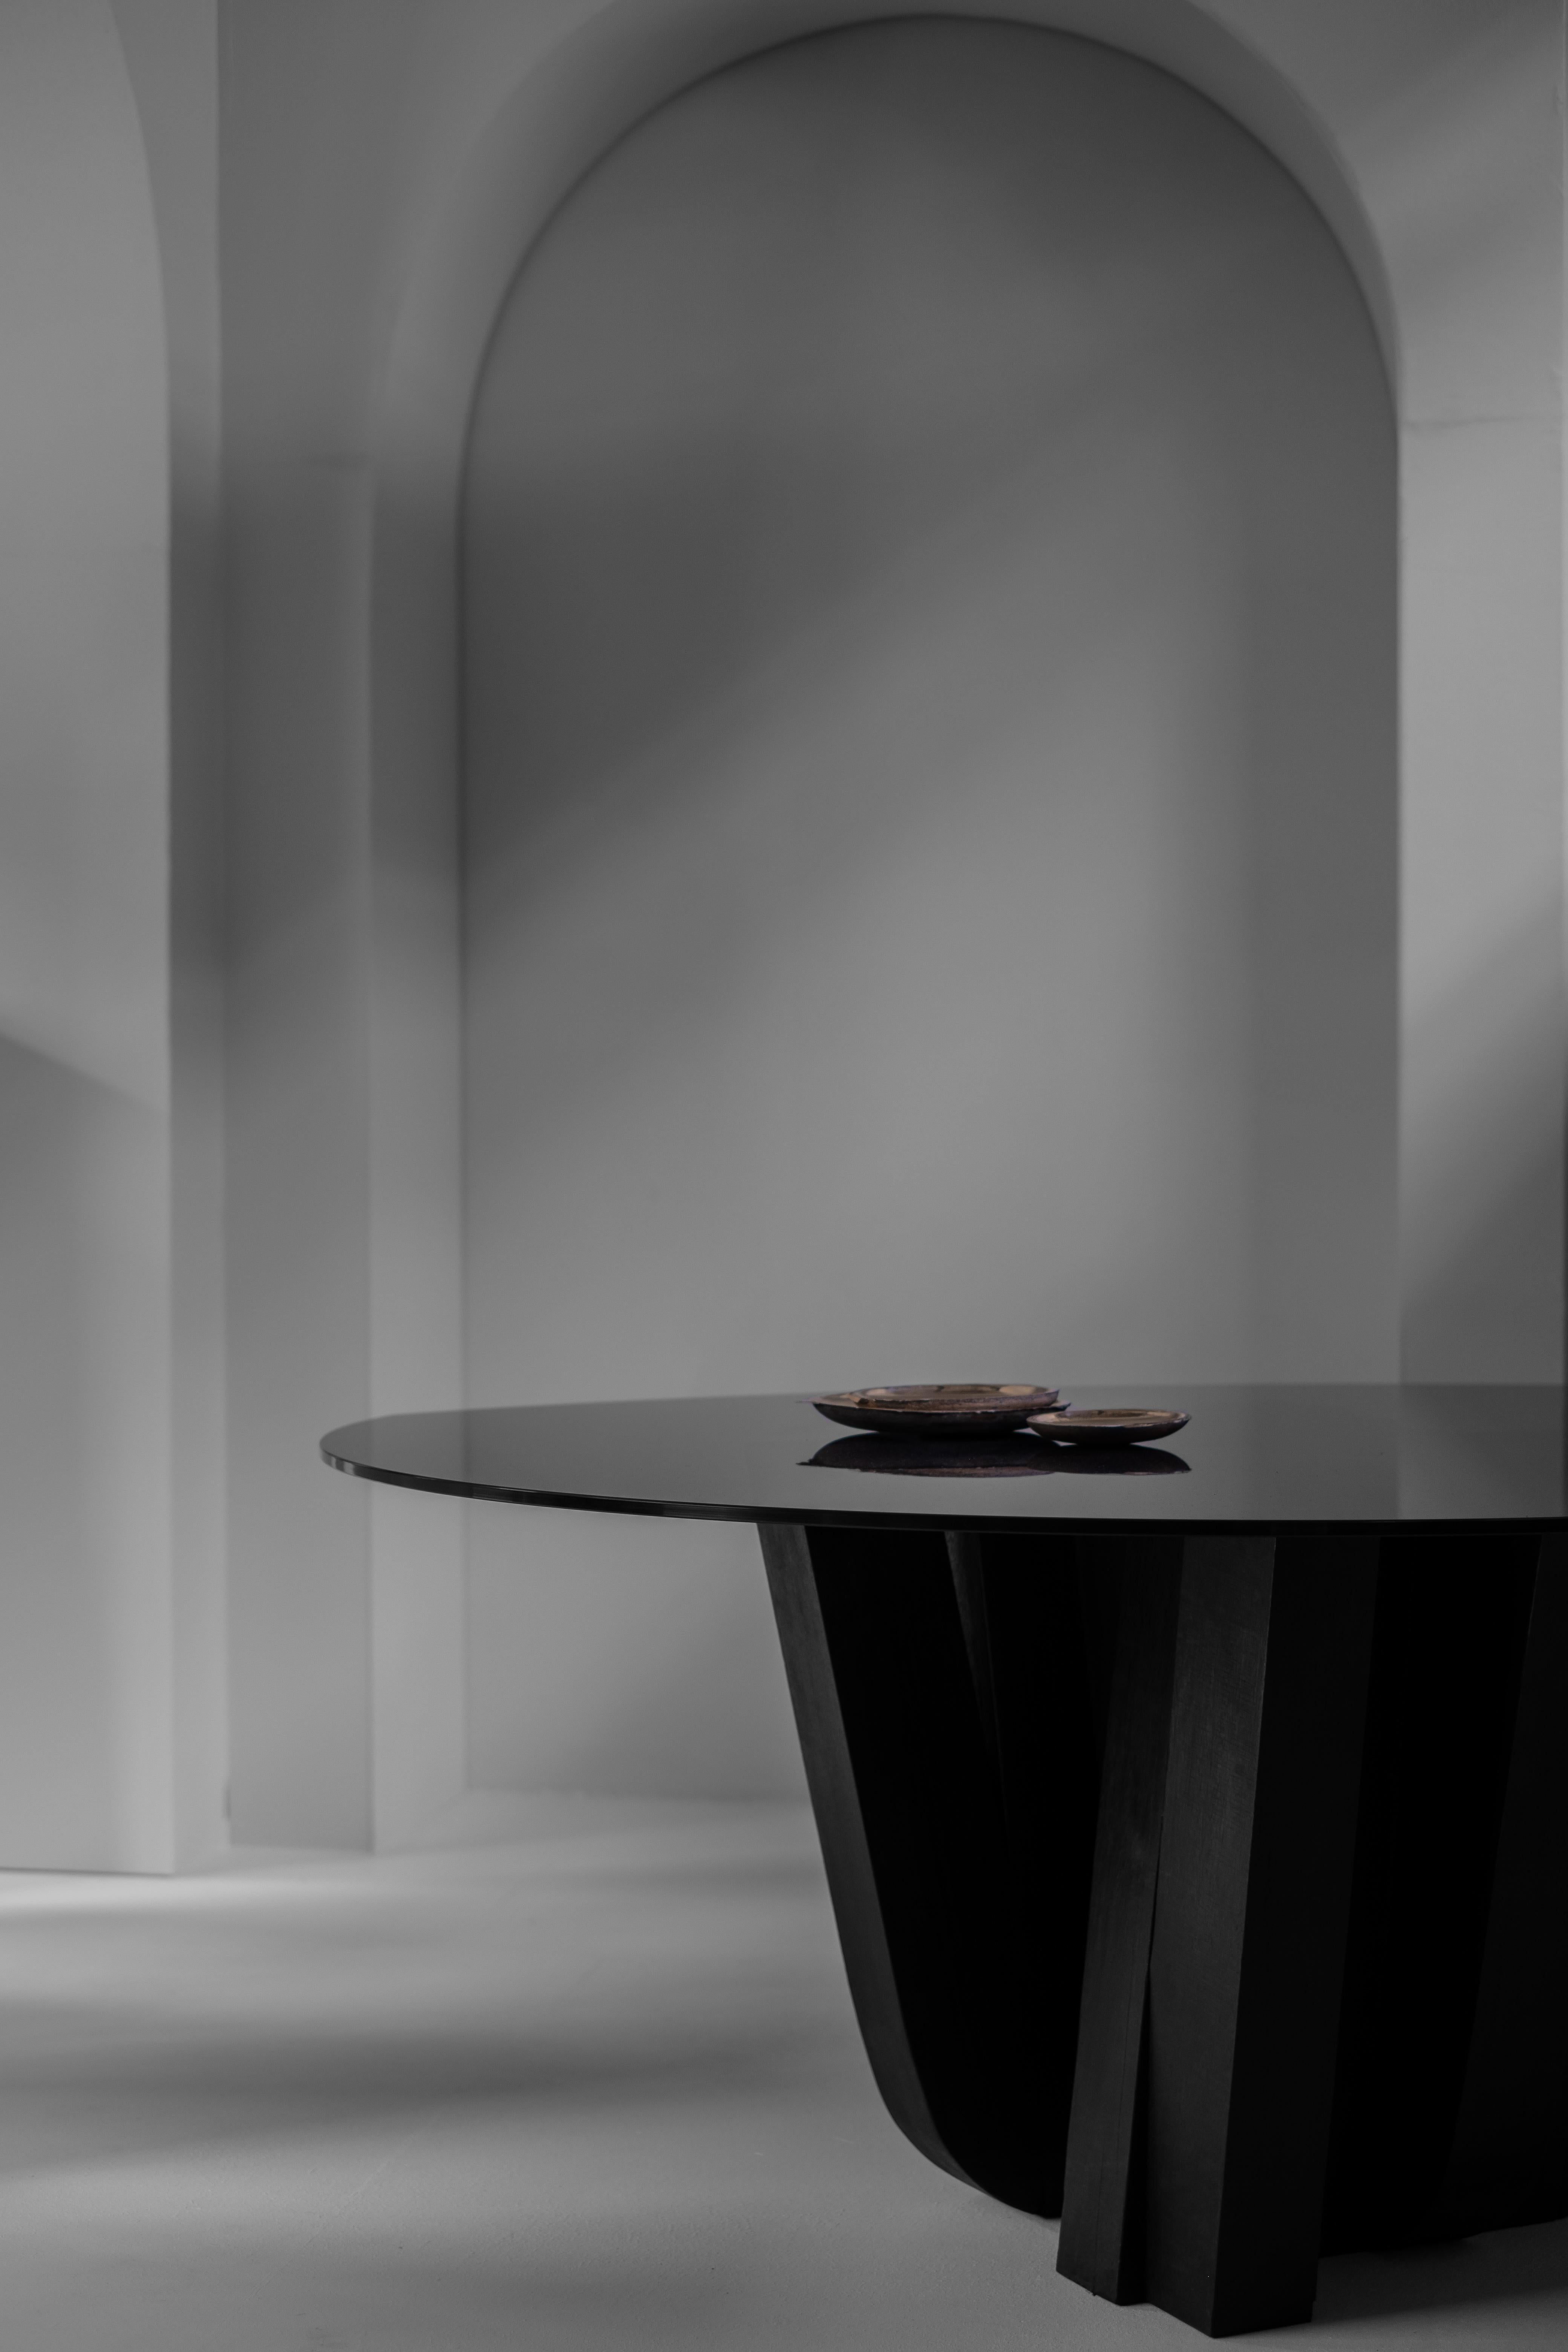 A-typical round table - signed by Arno Declercq

Measures: 
Top: L 160 cm x W 140 cm x H 1.2 cm
L 63